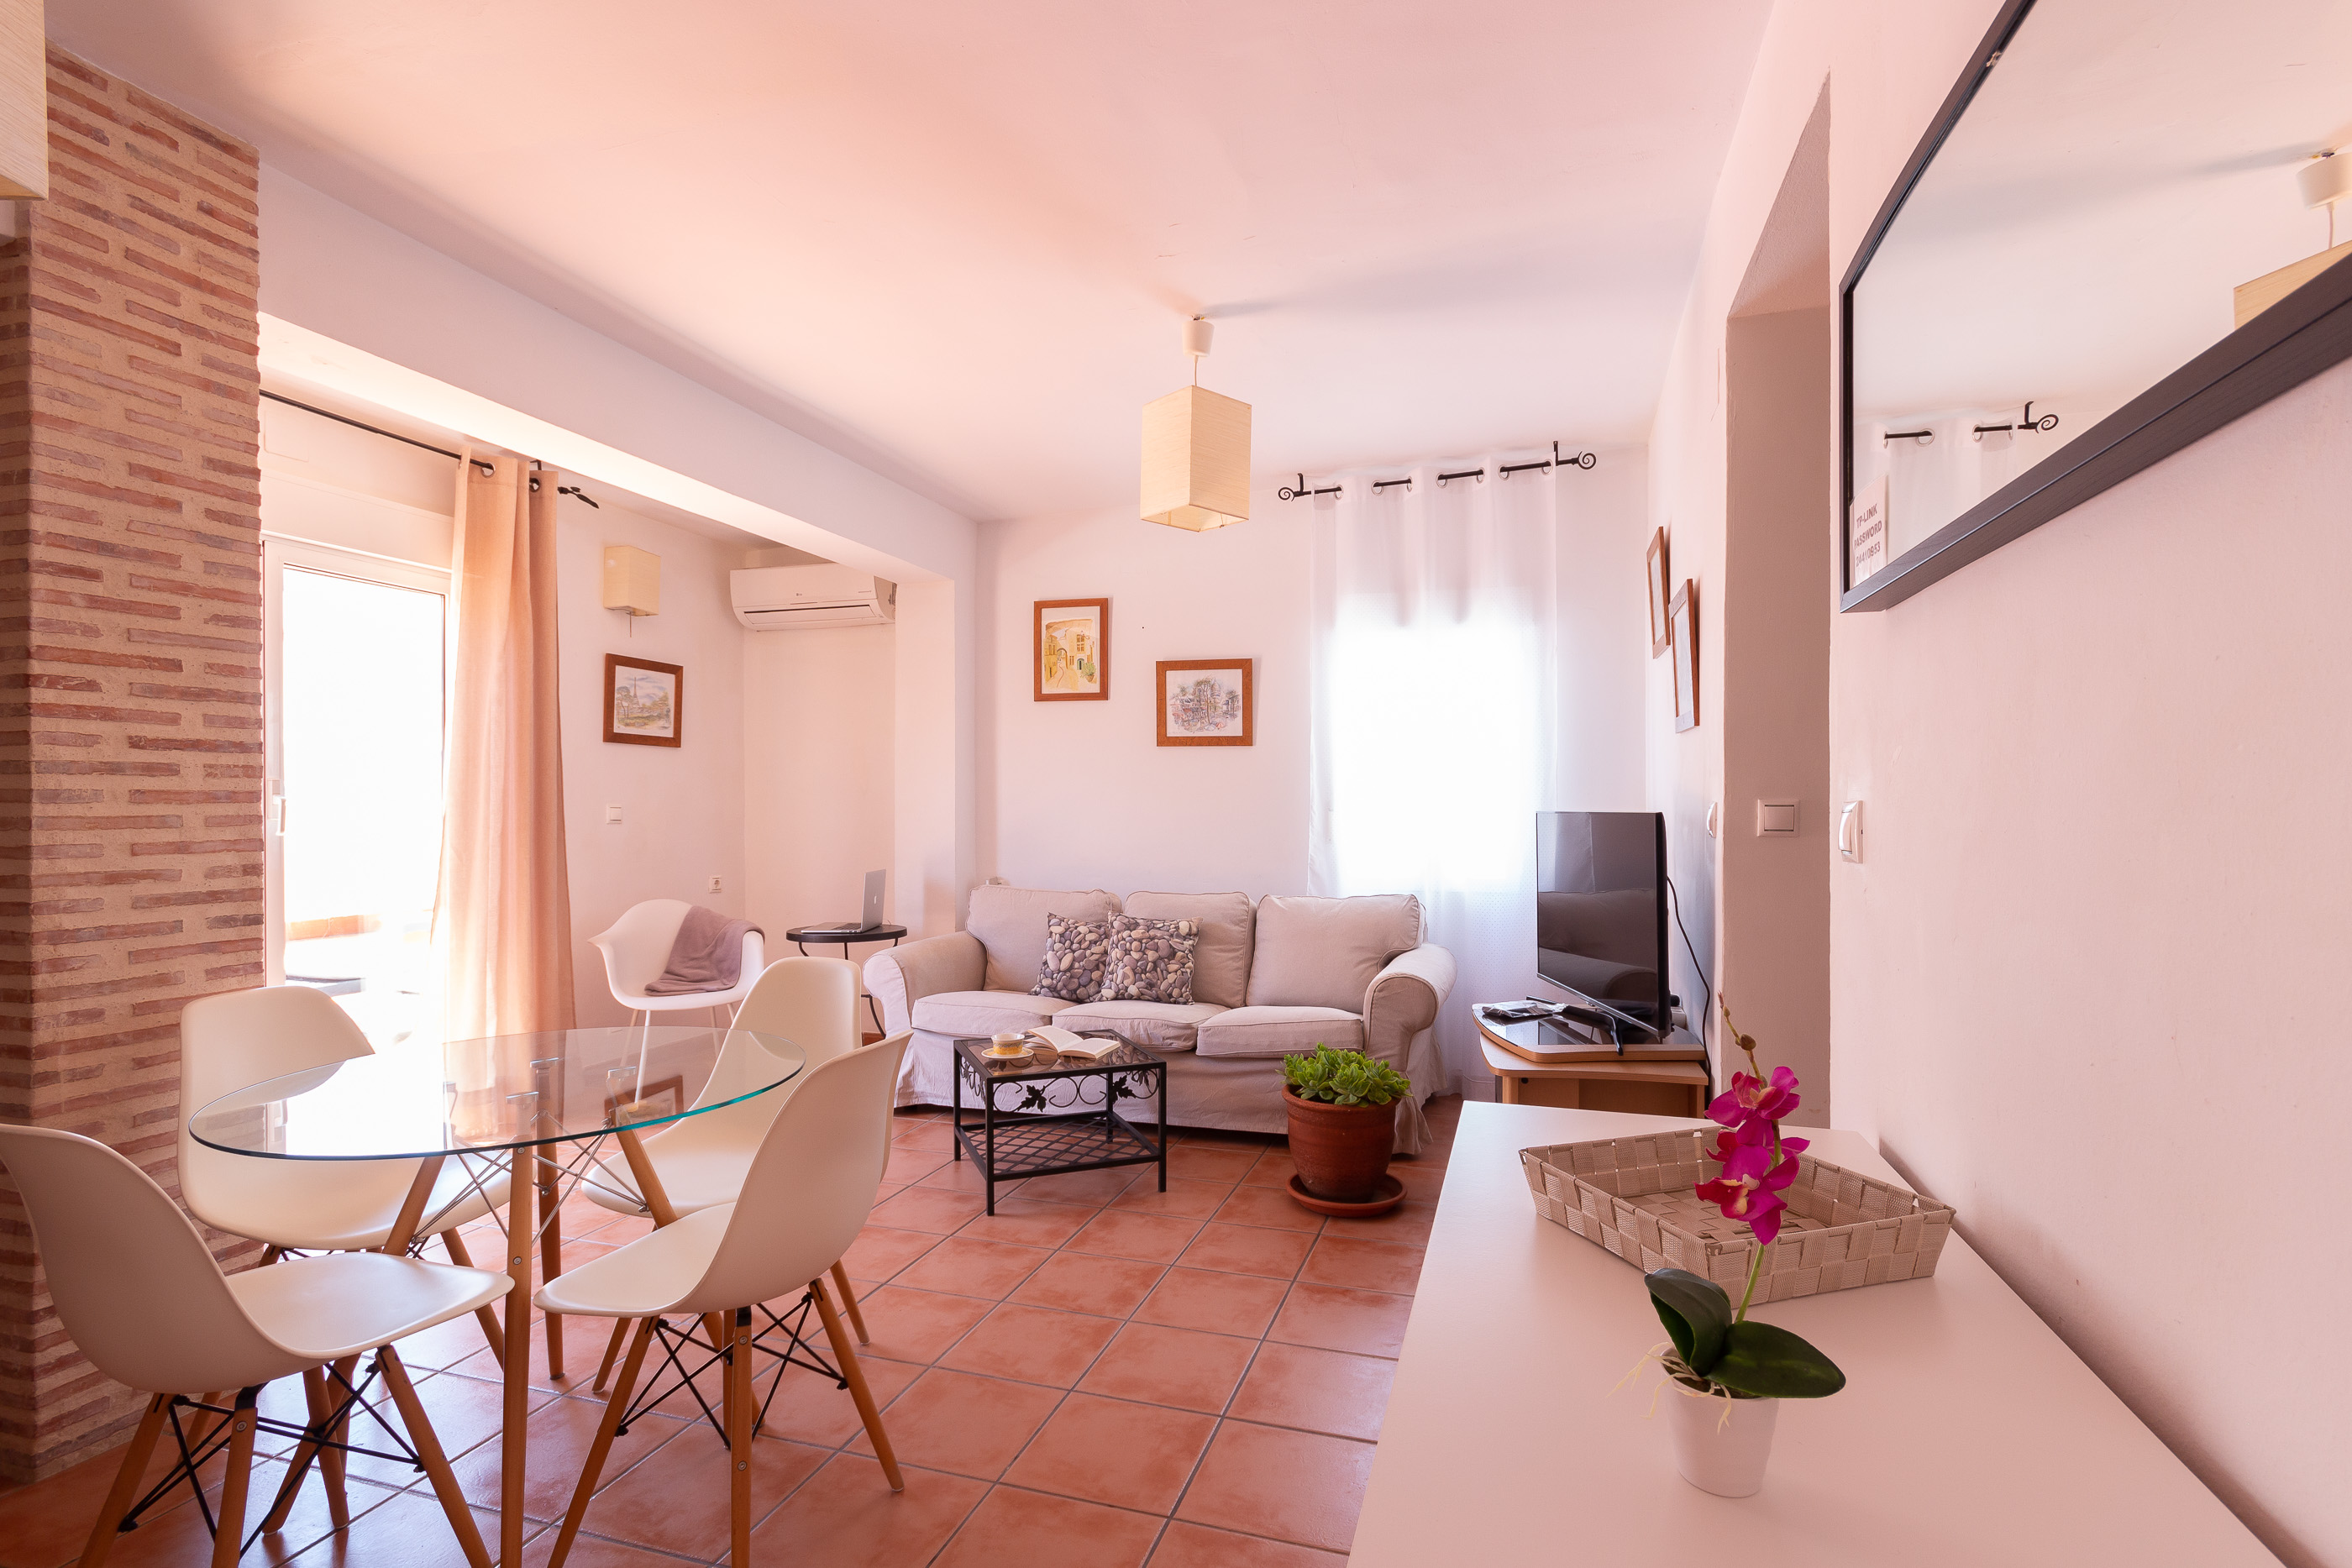 OPPORTUNITY TO ACQUIRE THIS PENTHOUSE IN THE CENTER OF CALPE WITH 2 BEDROOMS